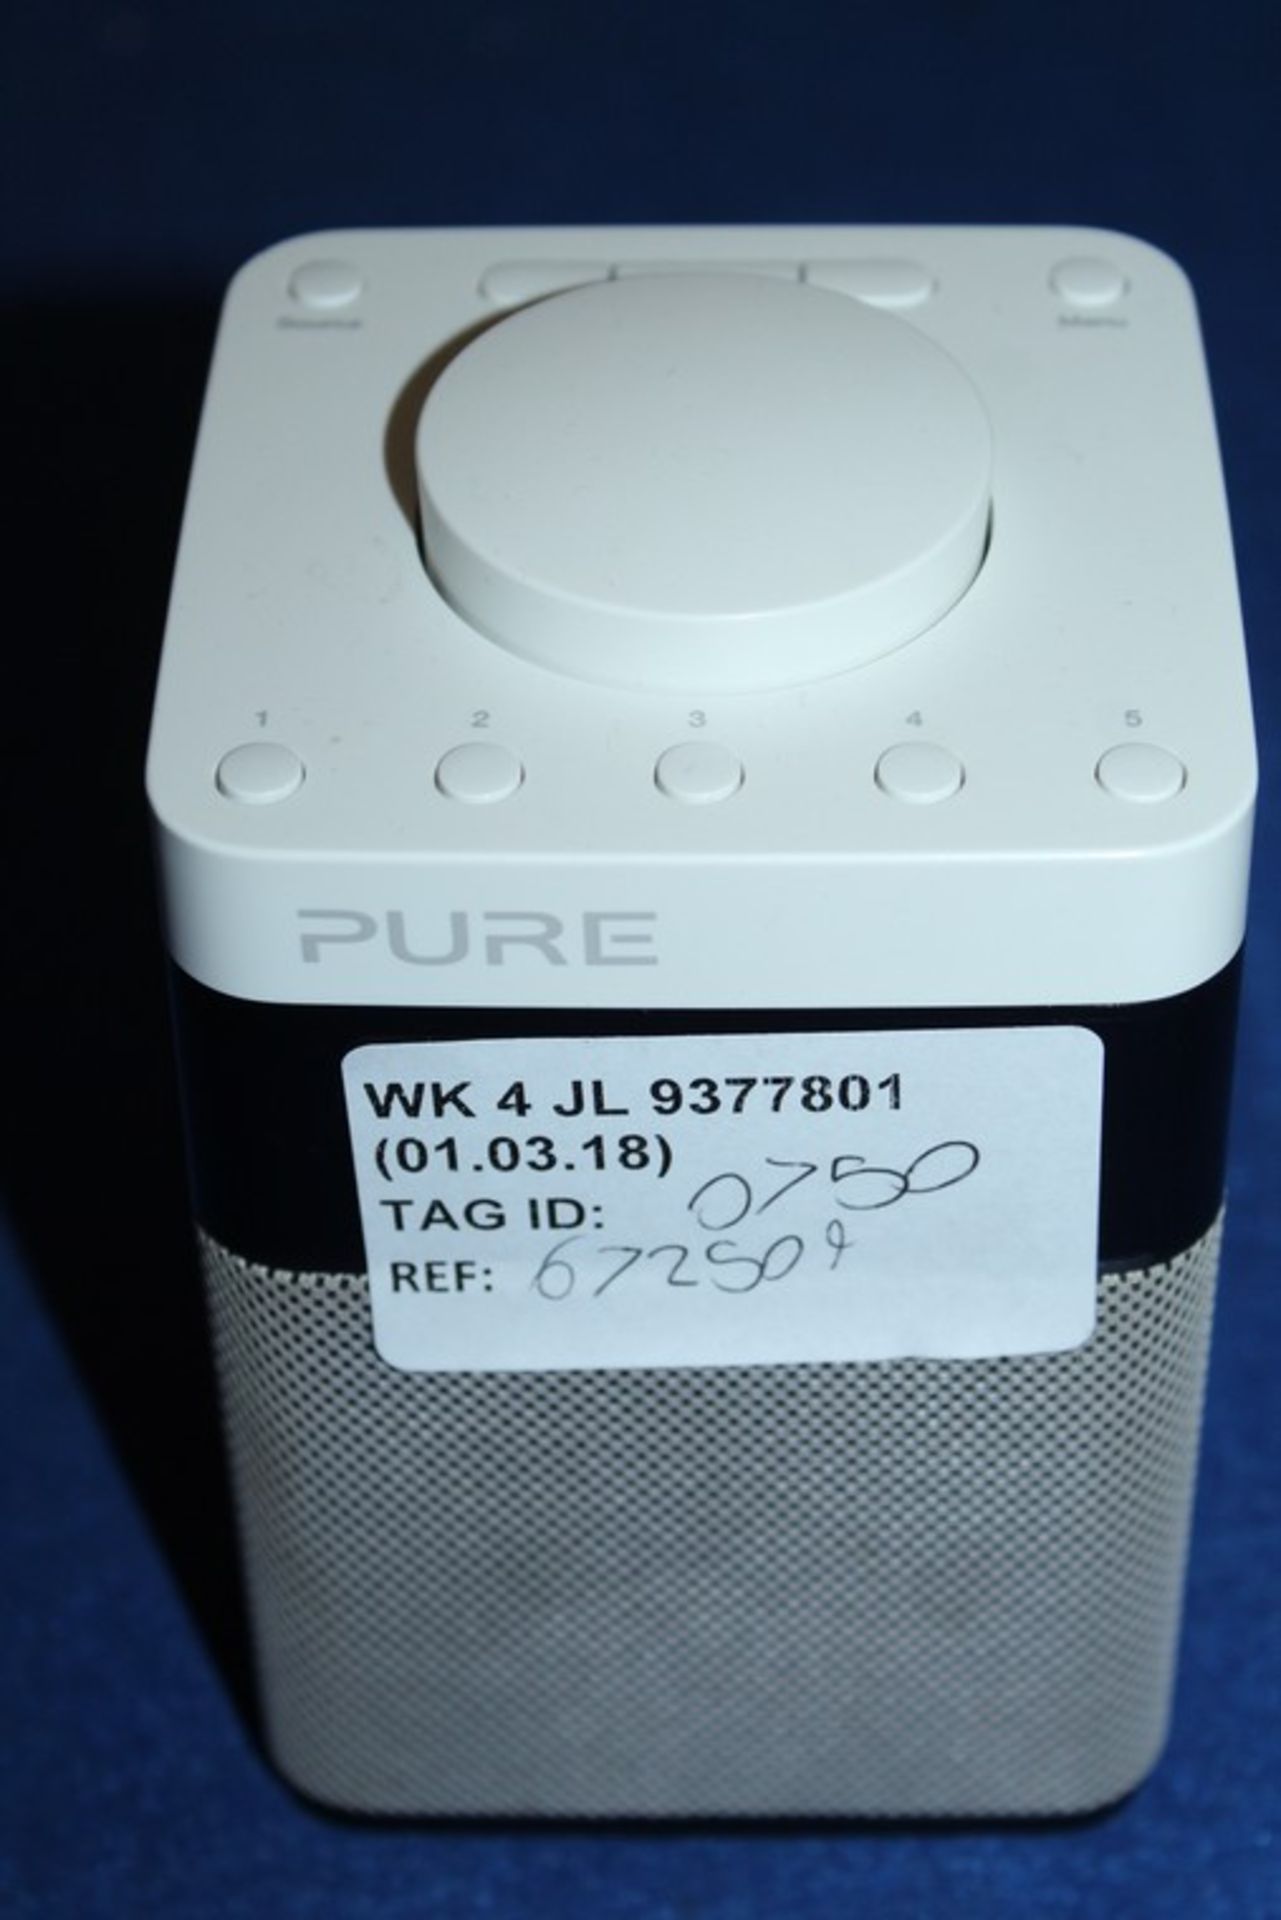 1 x PURE POP MINI RADIO RRP £75 (01.03.18) (672213) *PLEASE NOTE THAT THE BID PRICE IS MULTIPLIED BY